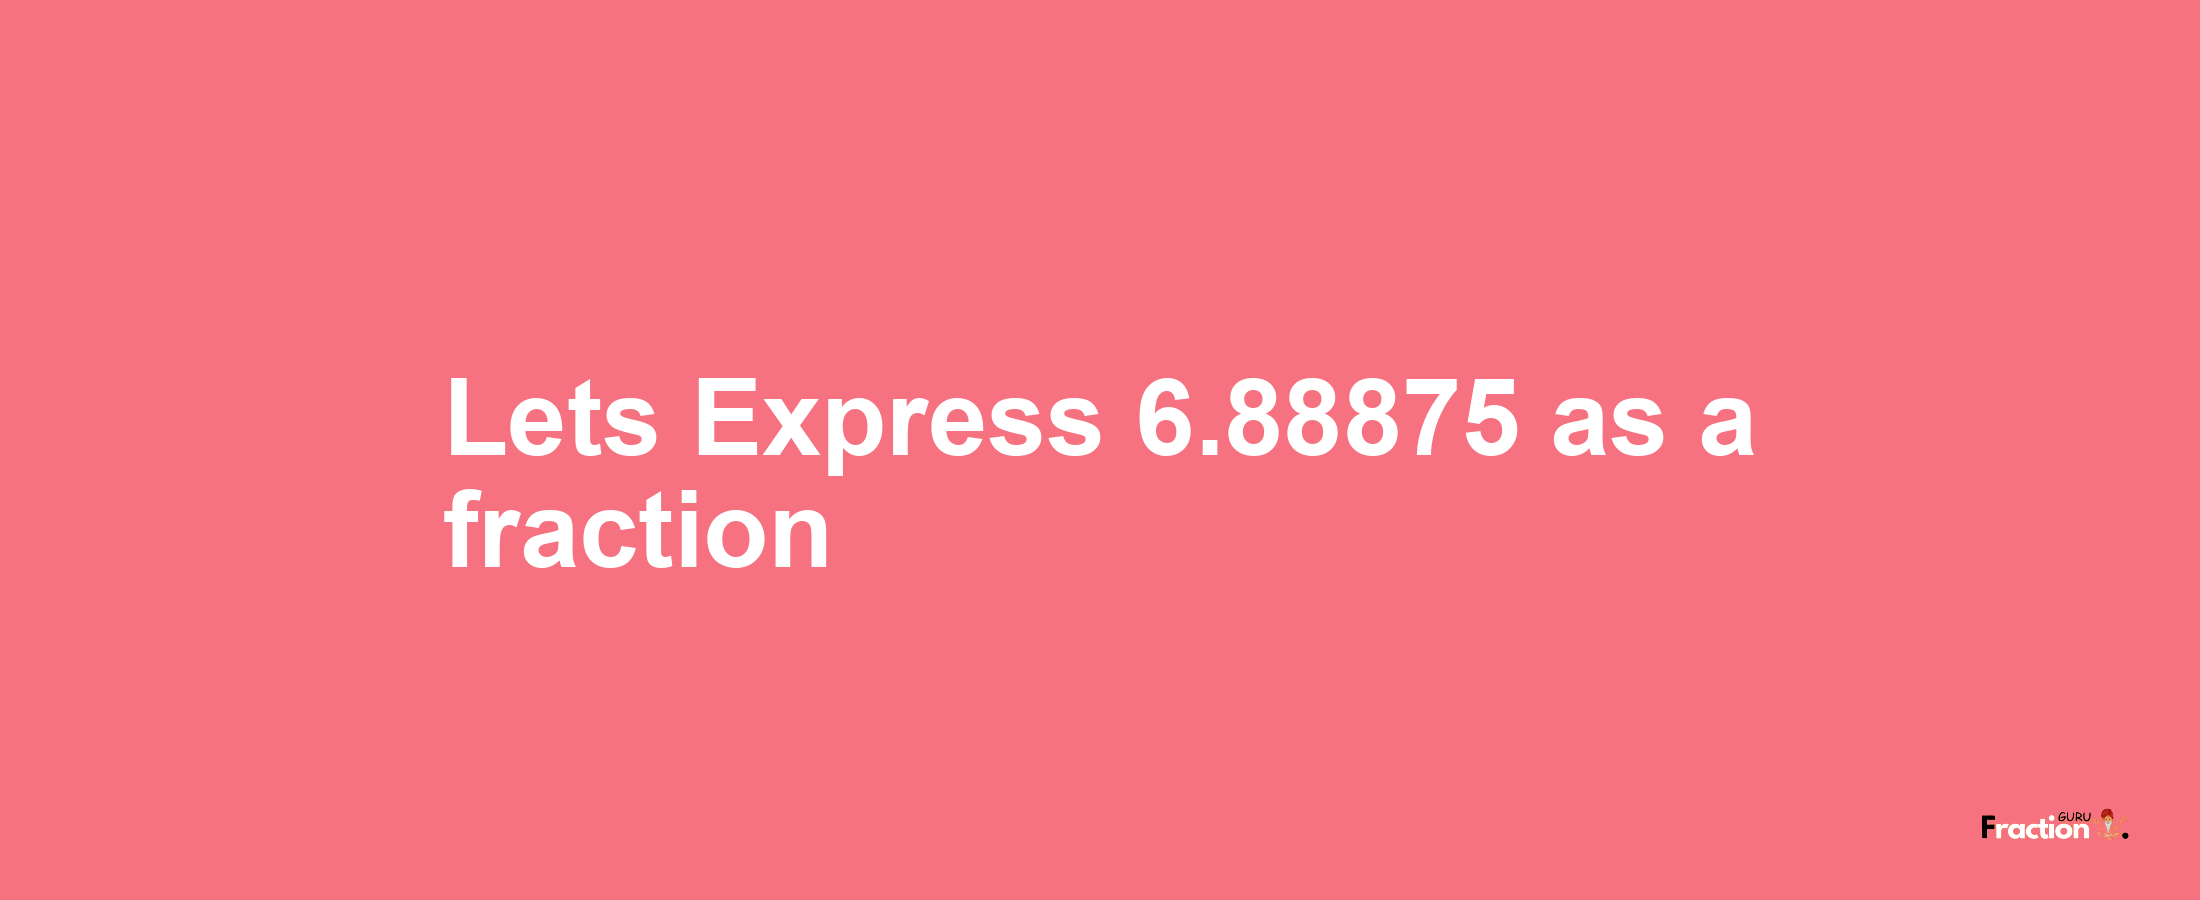 Lets Express 6.88875 as afraction